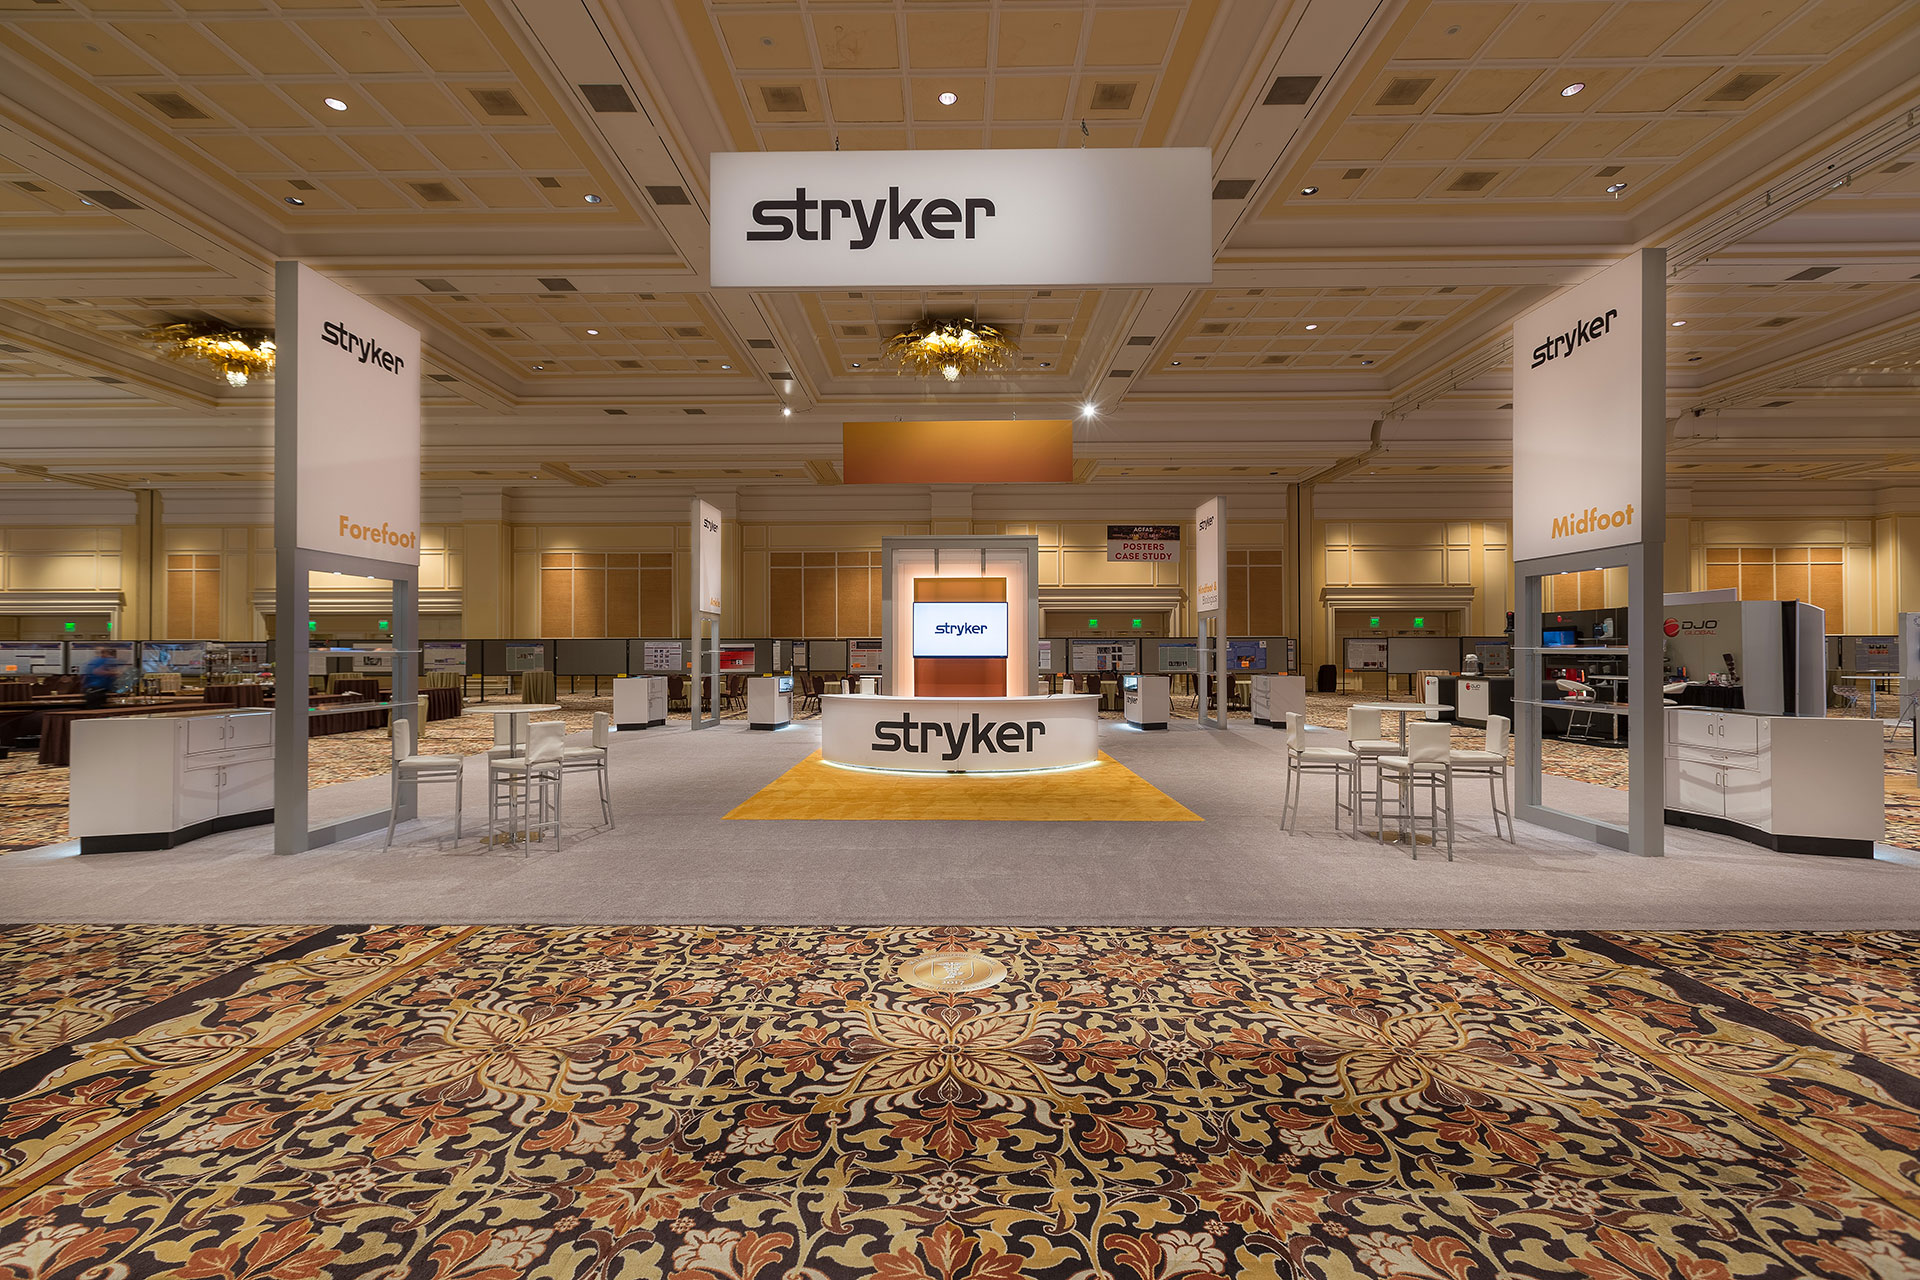 A centered photo of the Stryker booth at ACFAS 2017 with hanging banner, welcome counter with LCD screen, and four vertical signs all with the Stryker logo.